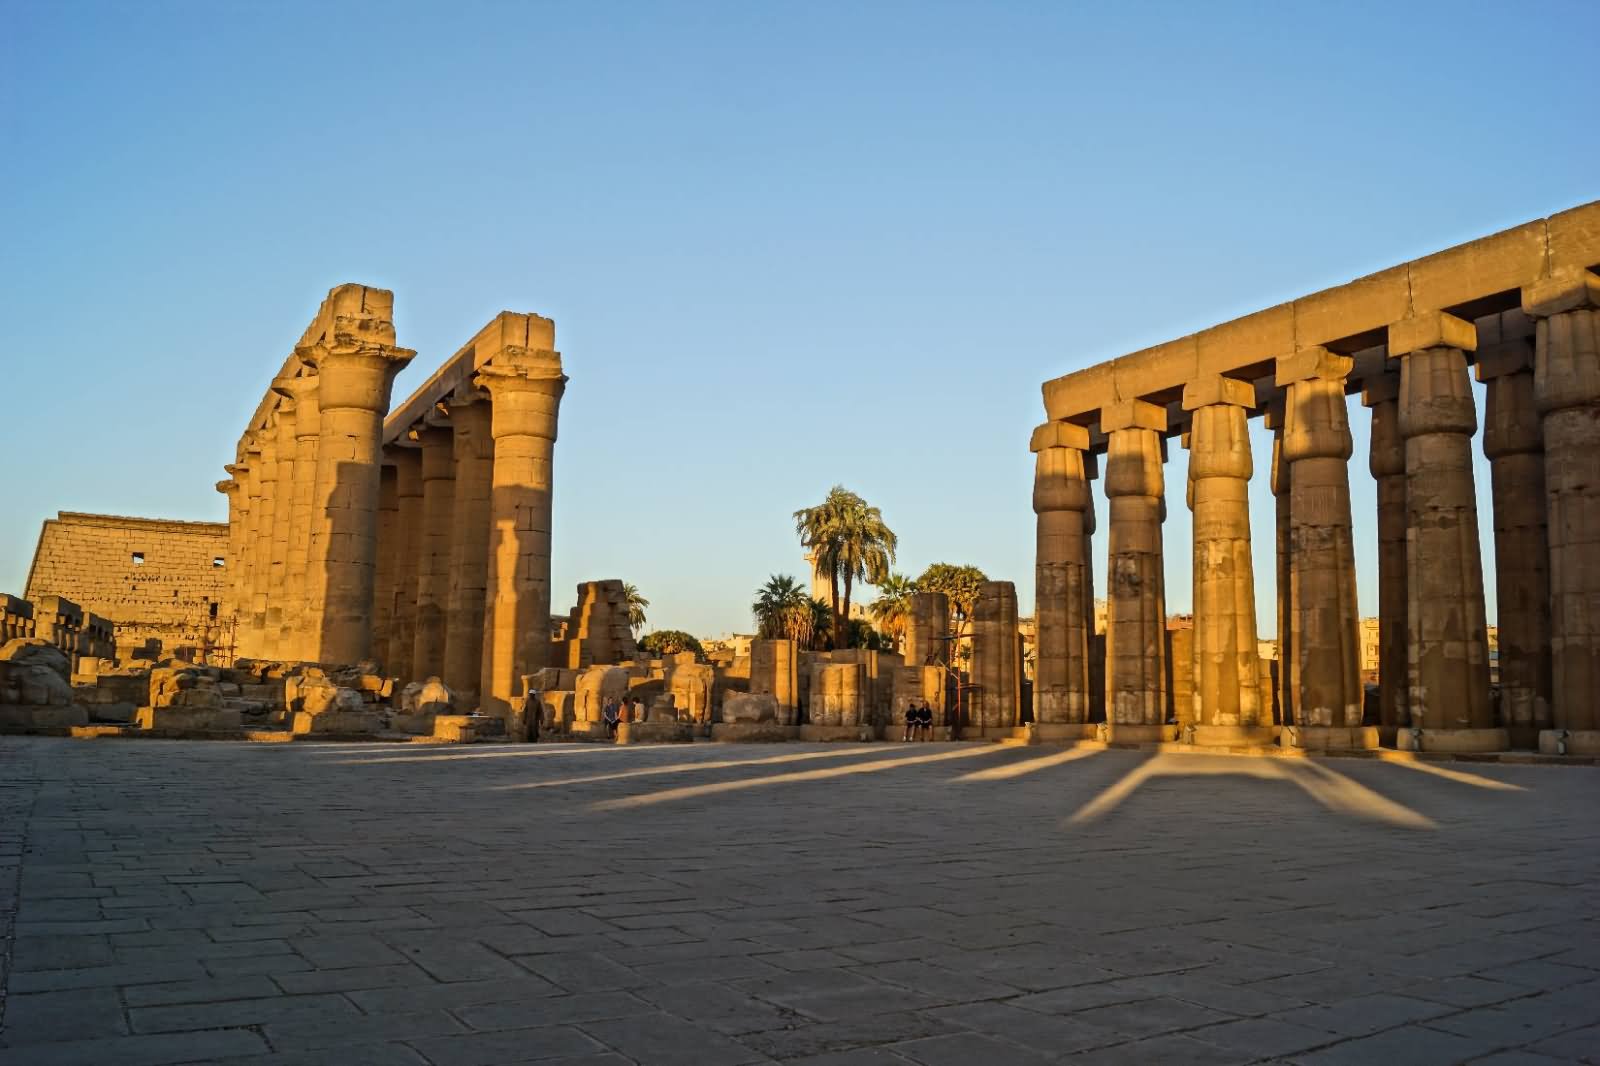 East Bank Columns At The Luxor Temple, Egypt